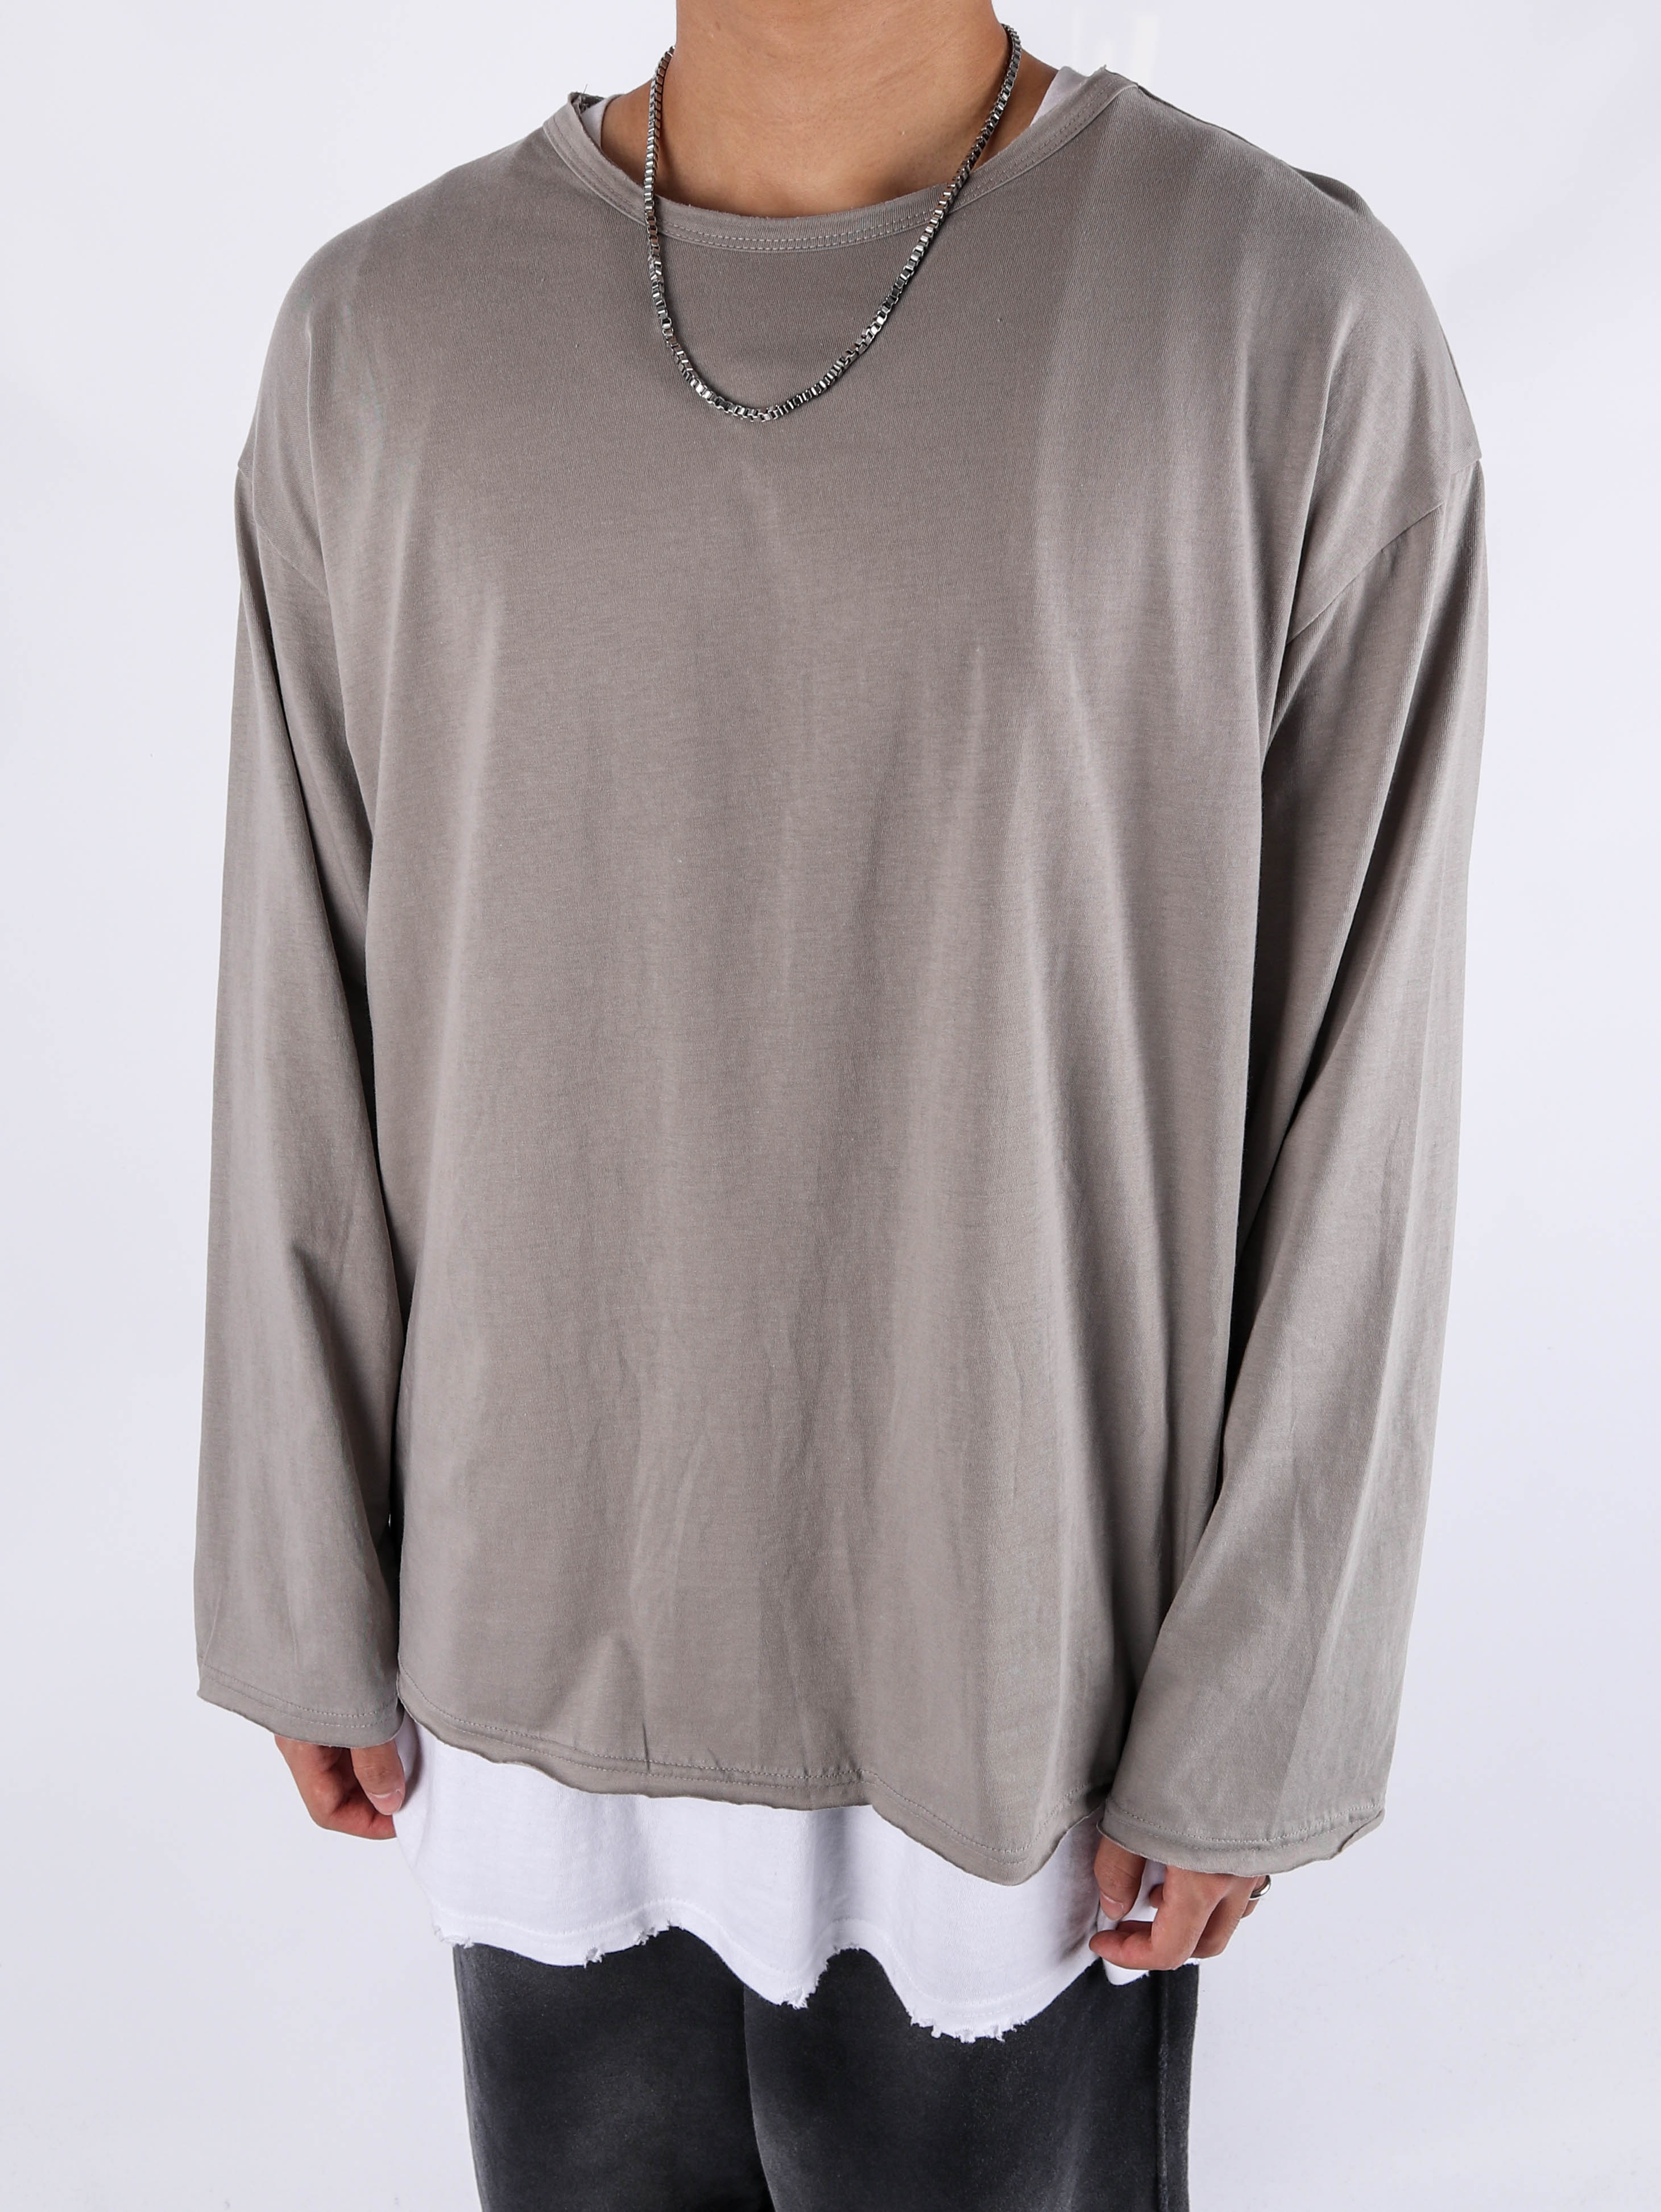 justyoung-US Vintage Neck Long Sleeve Tee (4color)♡韓國男裝上衣